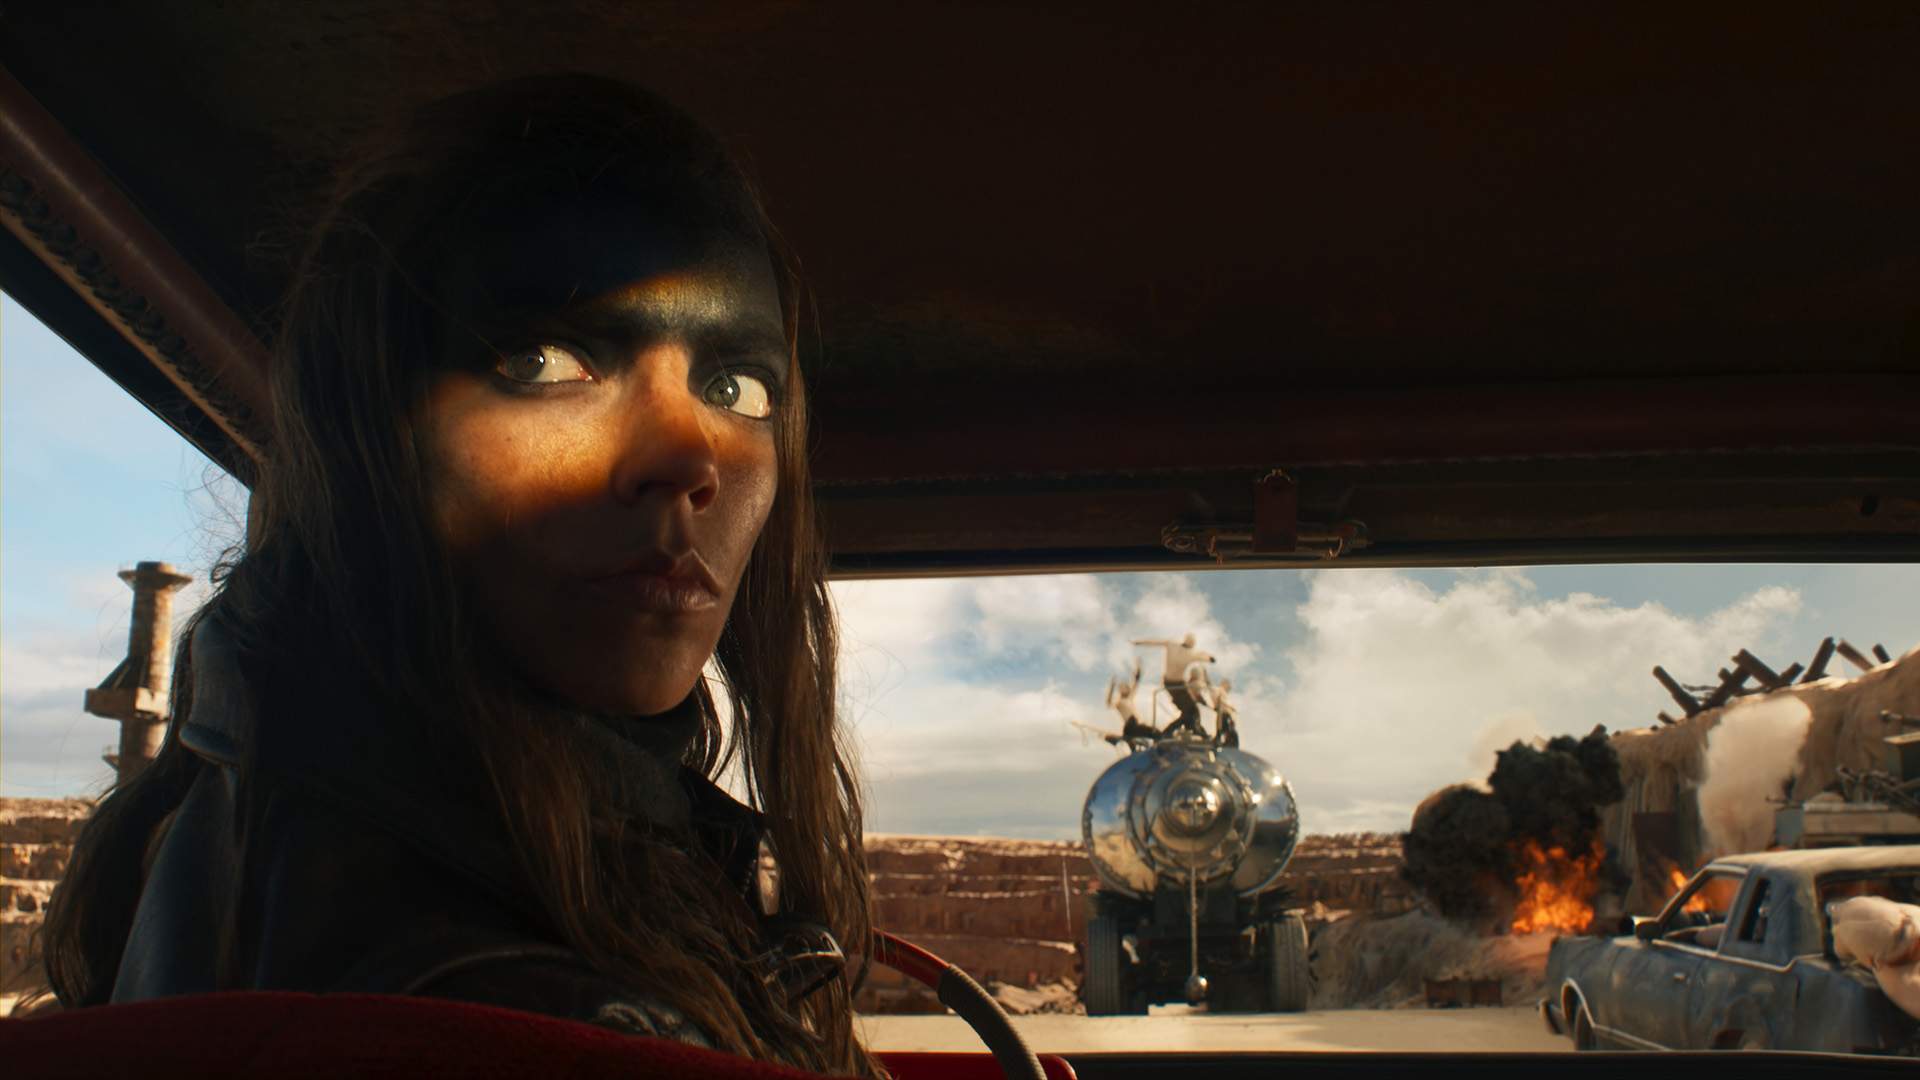 Furiosa Is on a Quest for Vengeance in the Latest Trailer for George Miller's 'Mad Max: Fury Road' Prequel